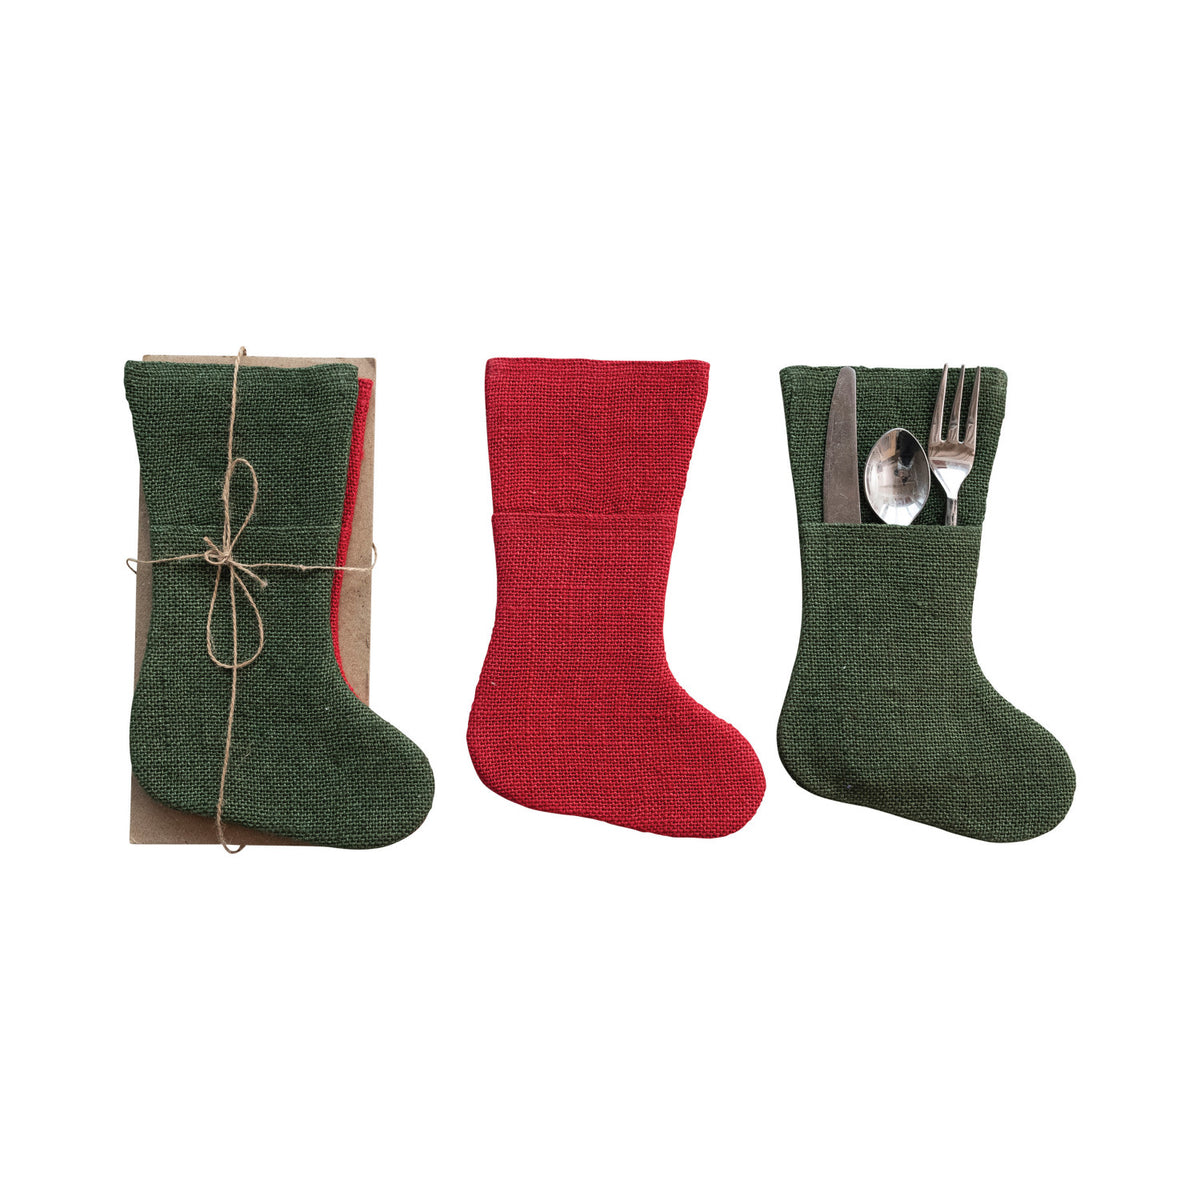 Woven Jute Stocking Shaped Cutlery Sleeves, Red & Green, Set of 4